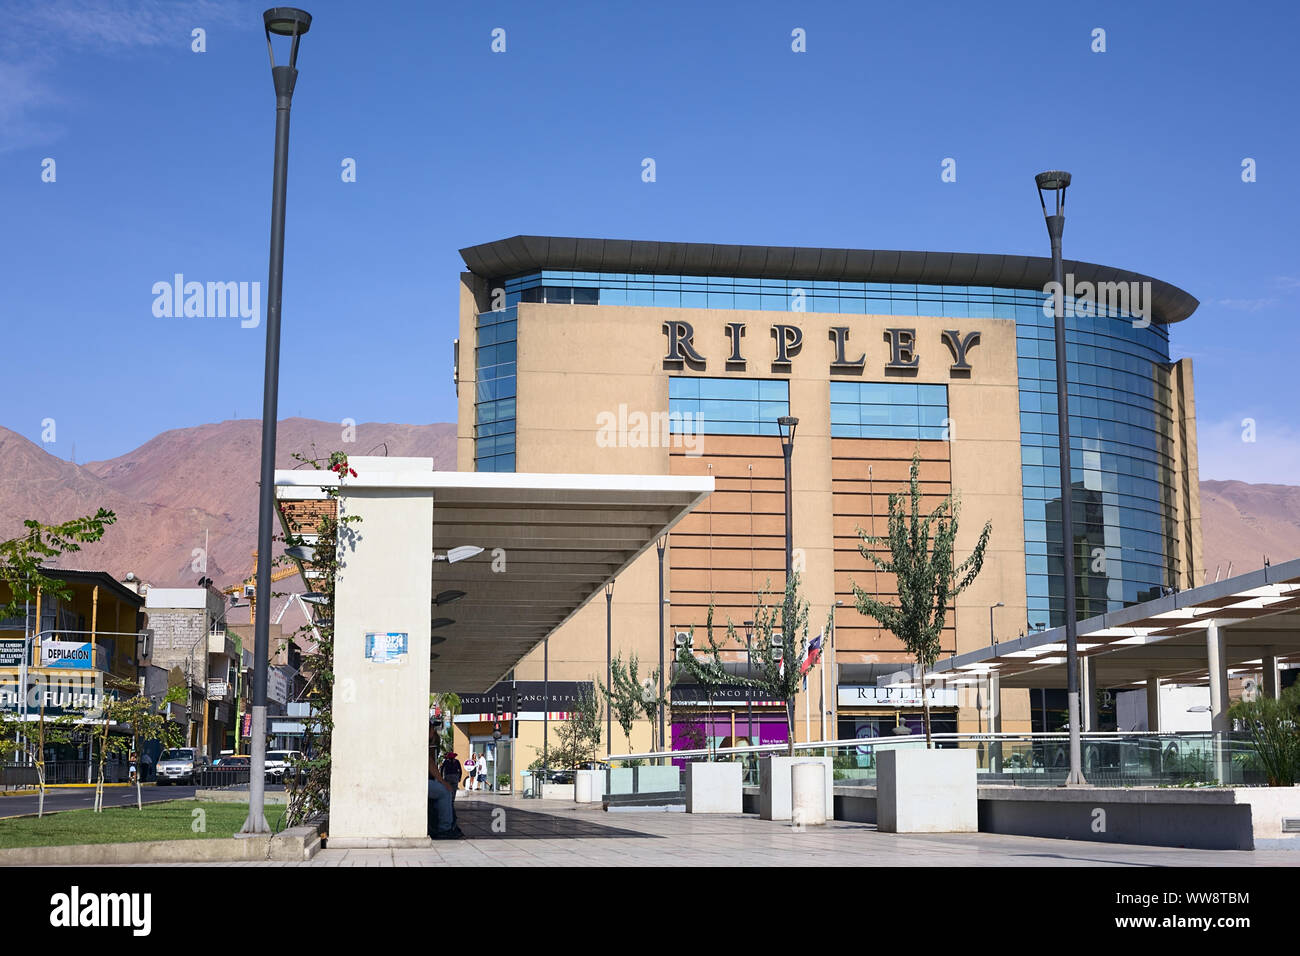 IQUIQUE, CHILE - FEBRUARY 11, 2015: Ripley Chilean department store on the corner of the streets Vivar and Tarapaca on February 11, 2015 in Iquique Stock Photo